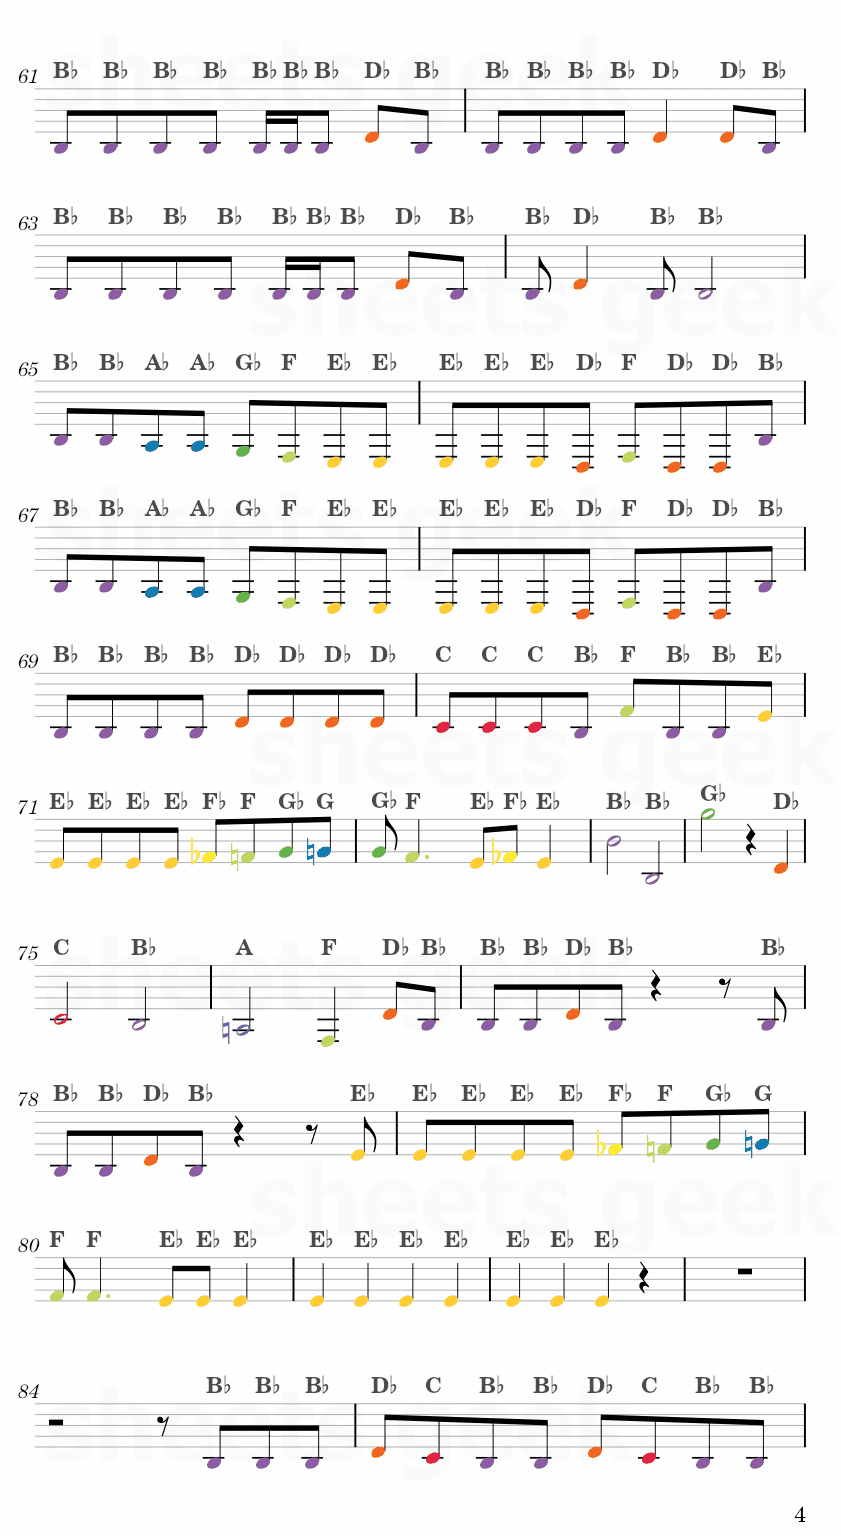 Sharks - Imagine Dragons Easy Sheet Music Free for piano, keyboard, flute, violin, sax, cello page 4